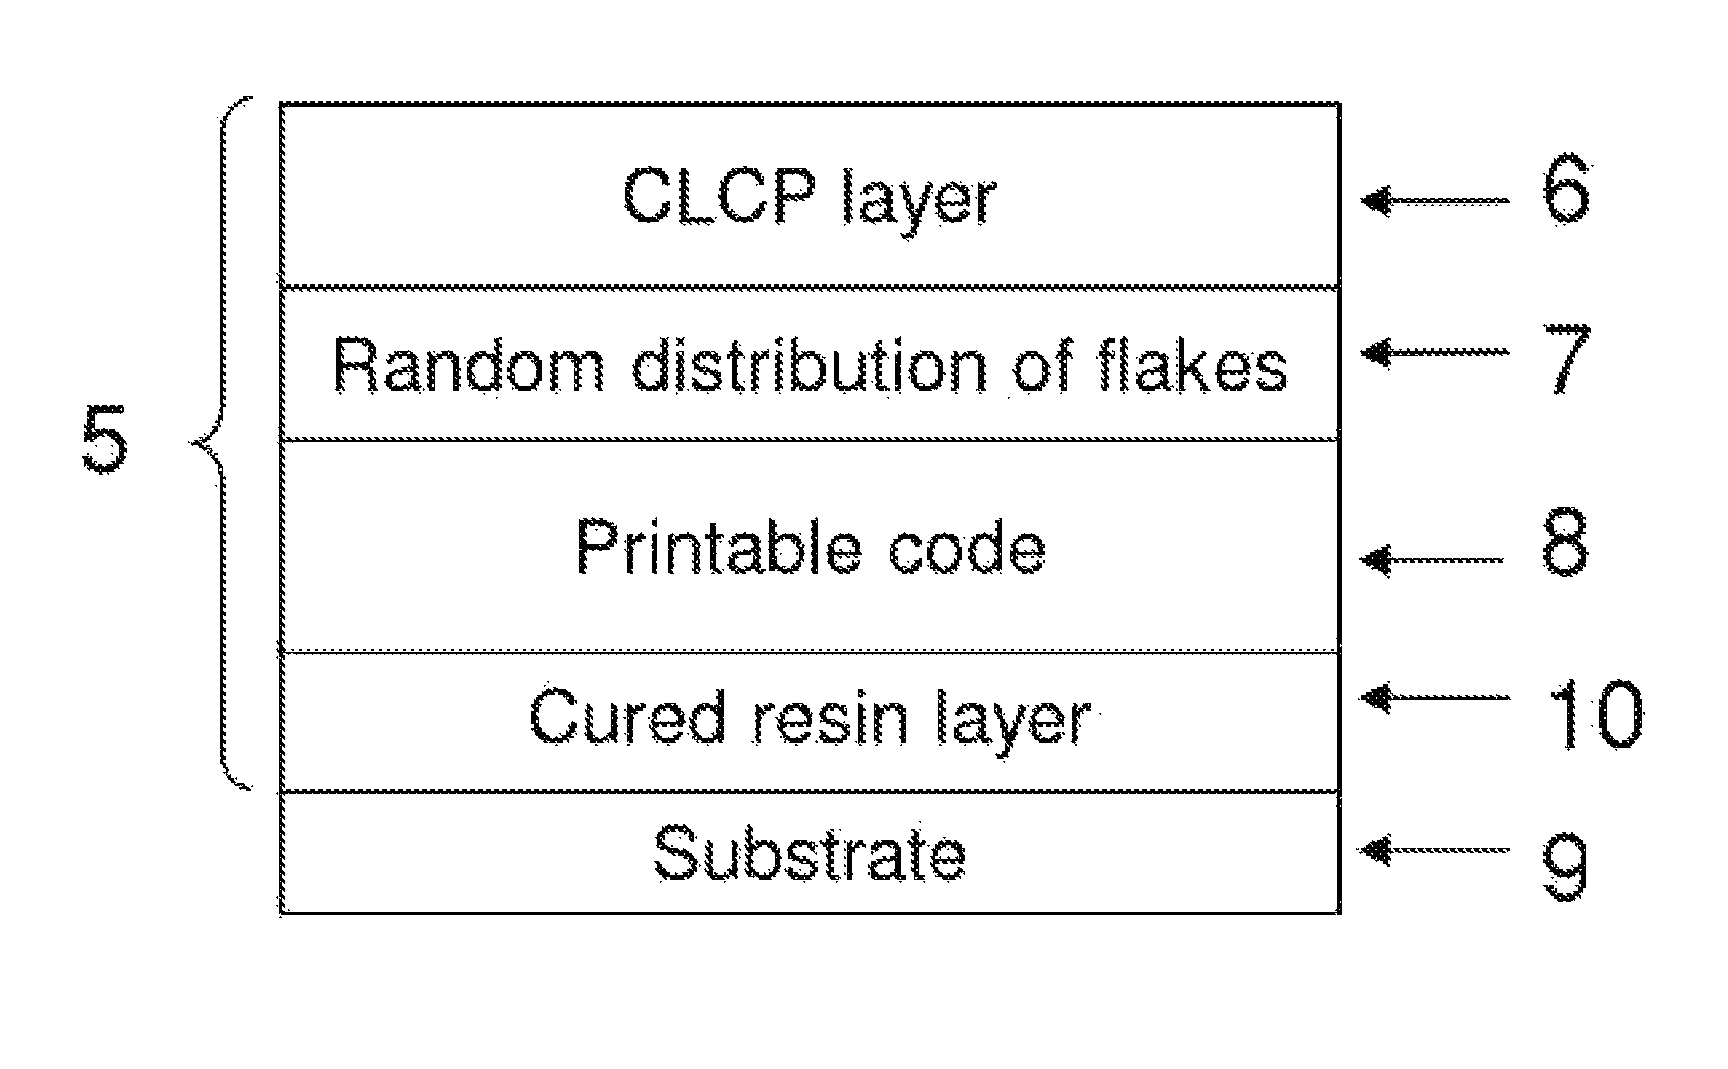 Marking comprising a printable code and a chiral liquid crystal polymer layer